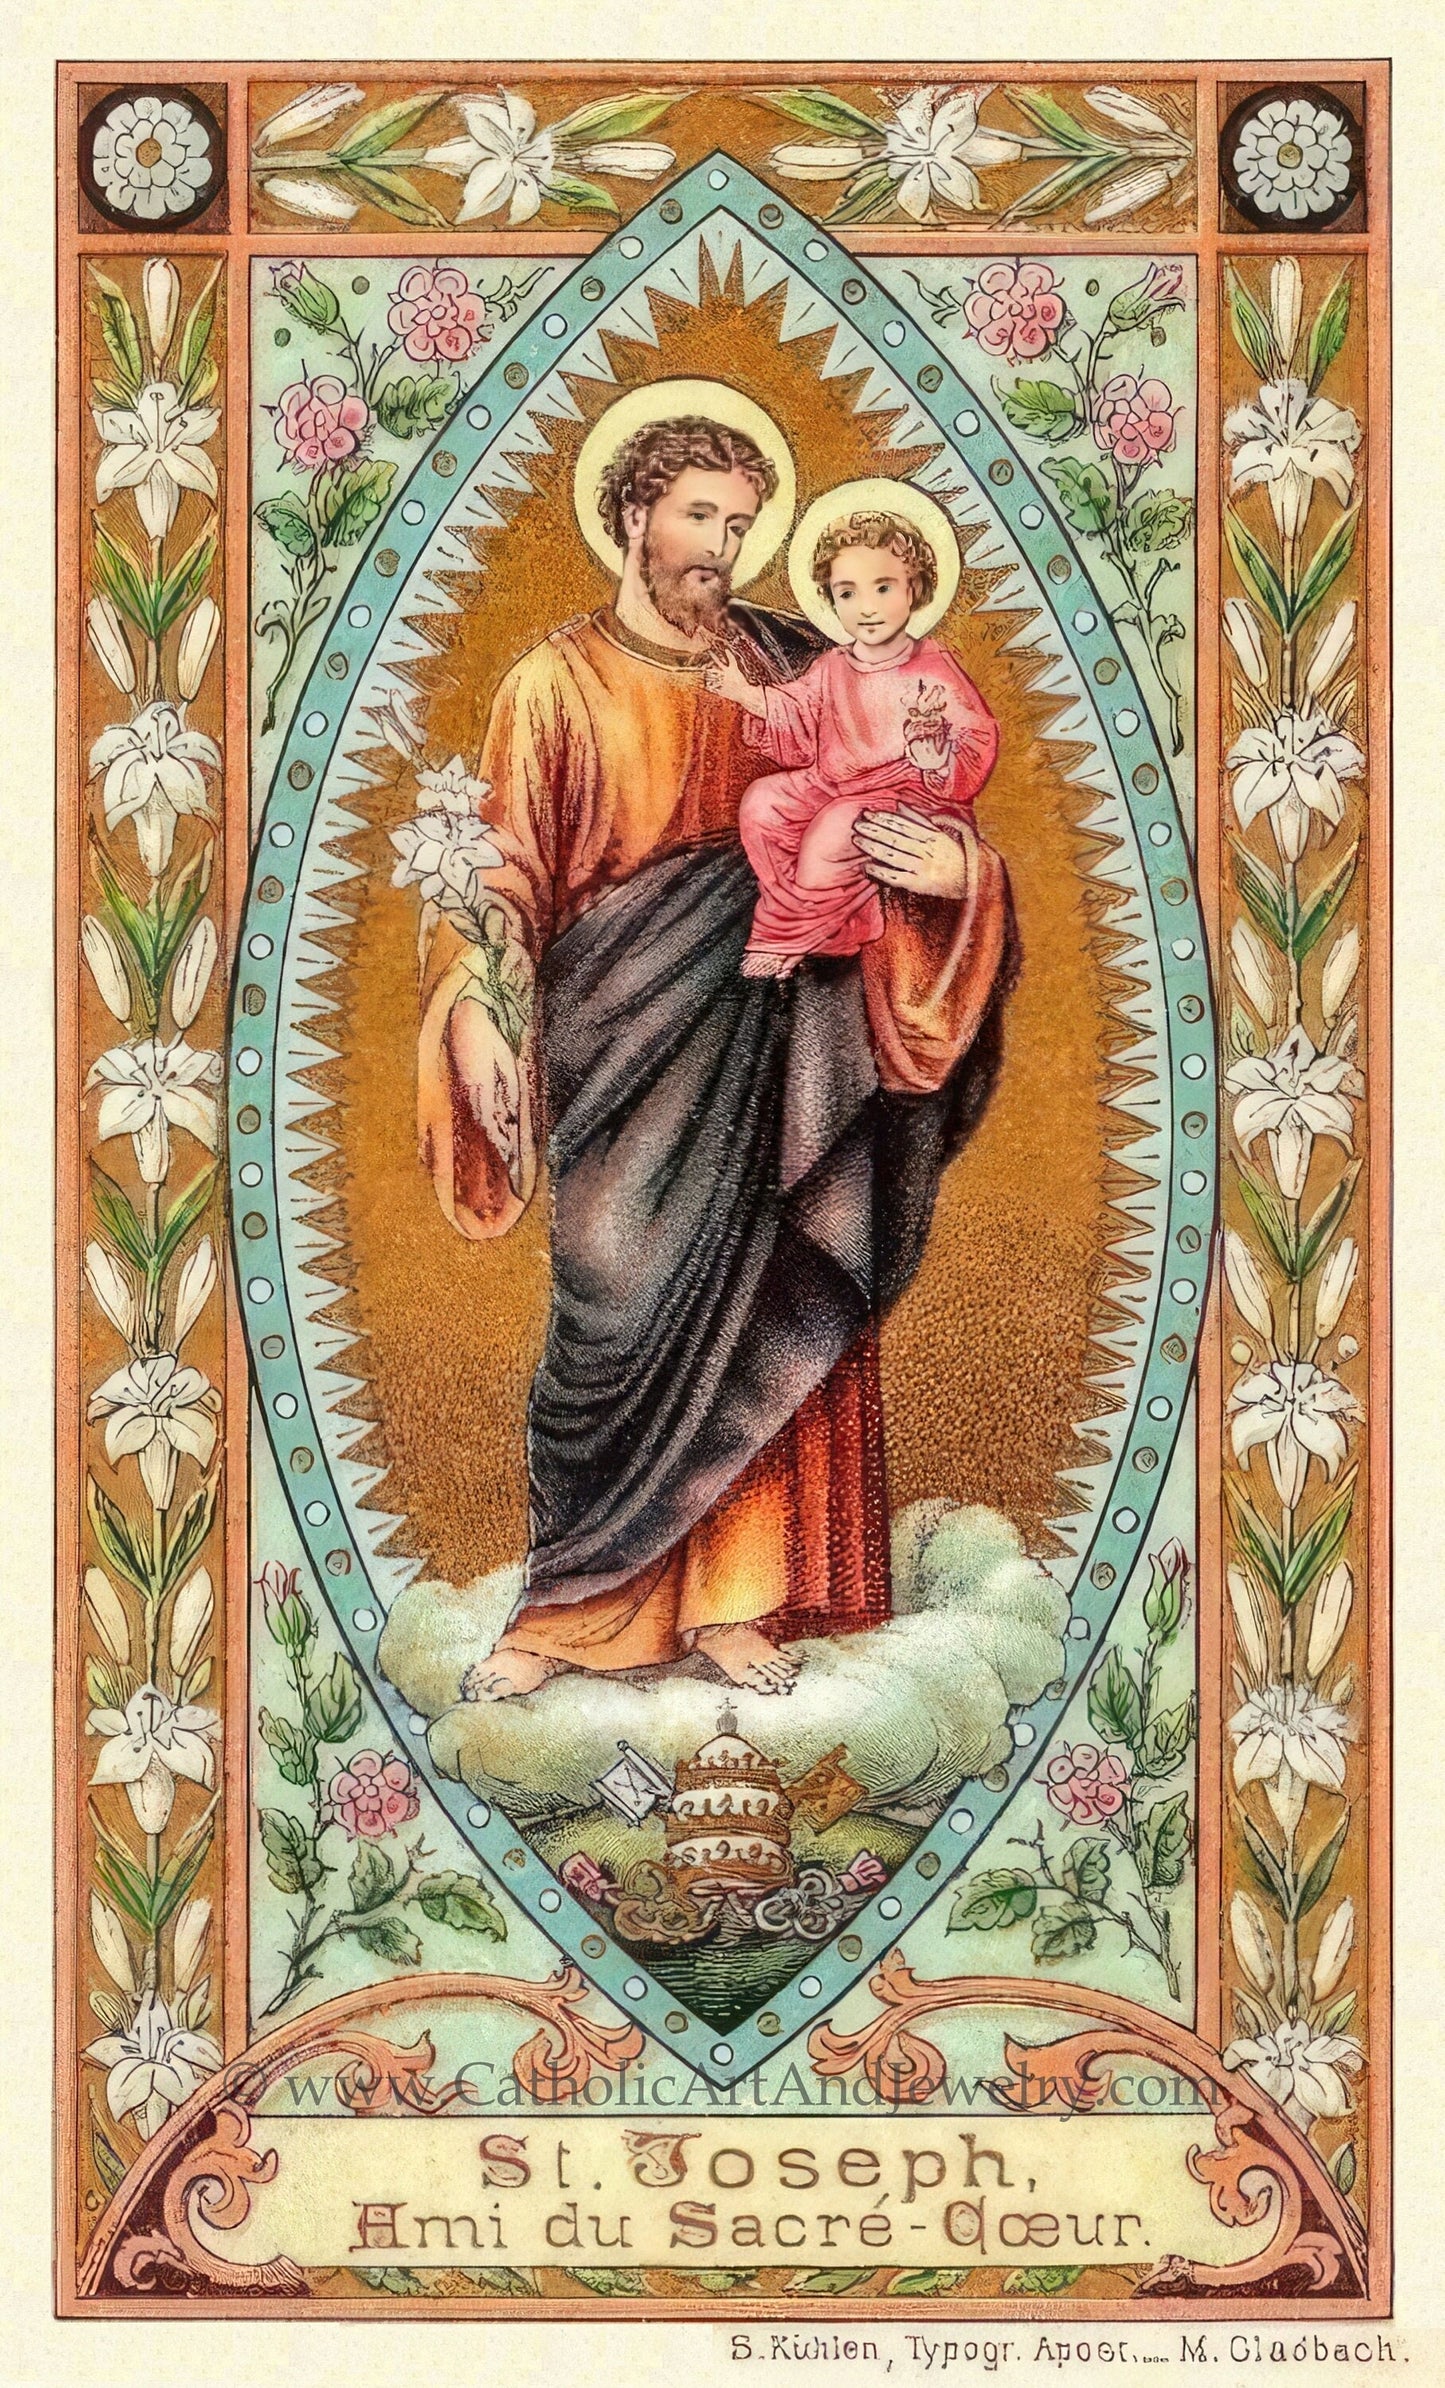 New! St. Joseph, Love of the Sacred Heart – based on a Vintage Holy Card – Catholic Art Print – Archival Quality